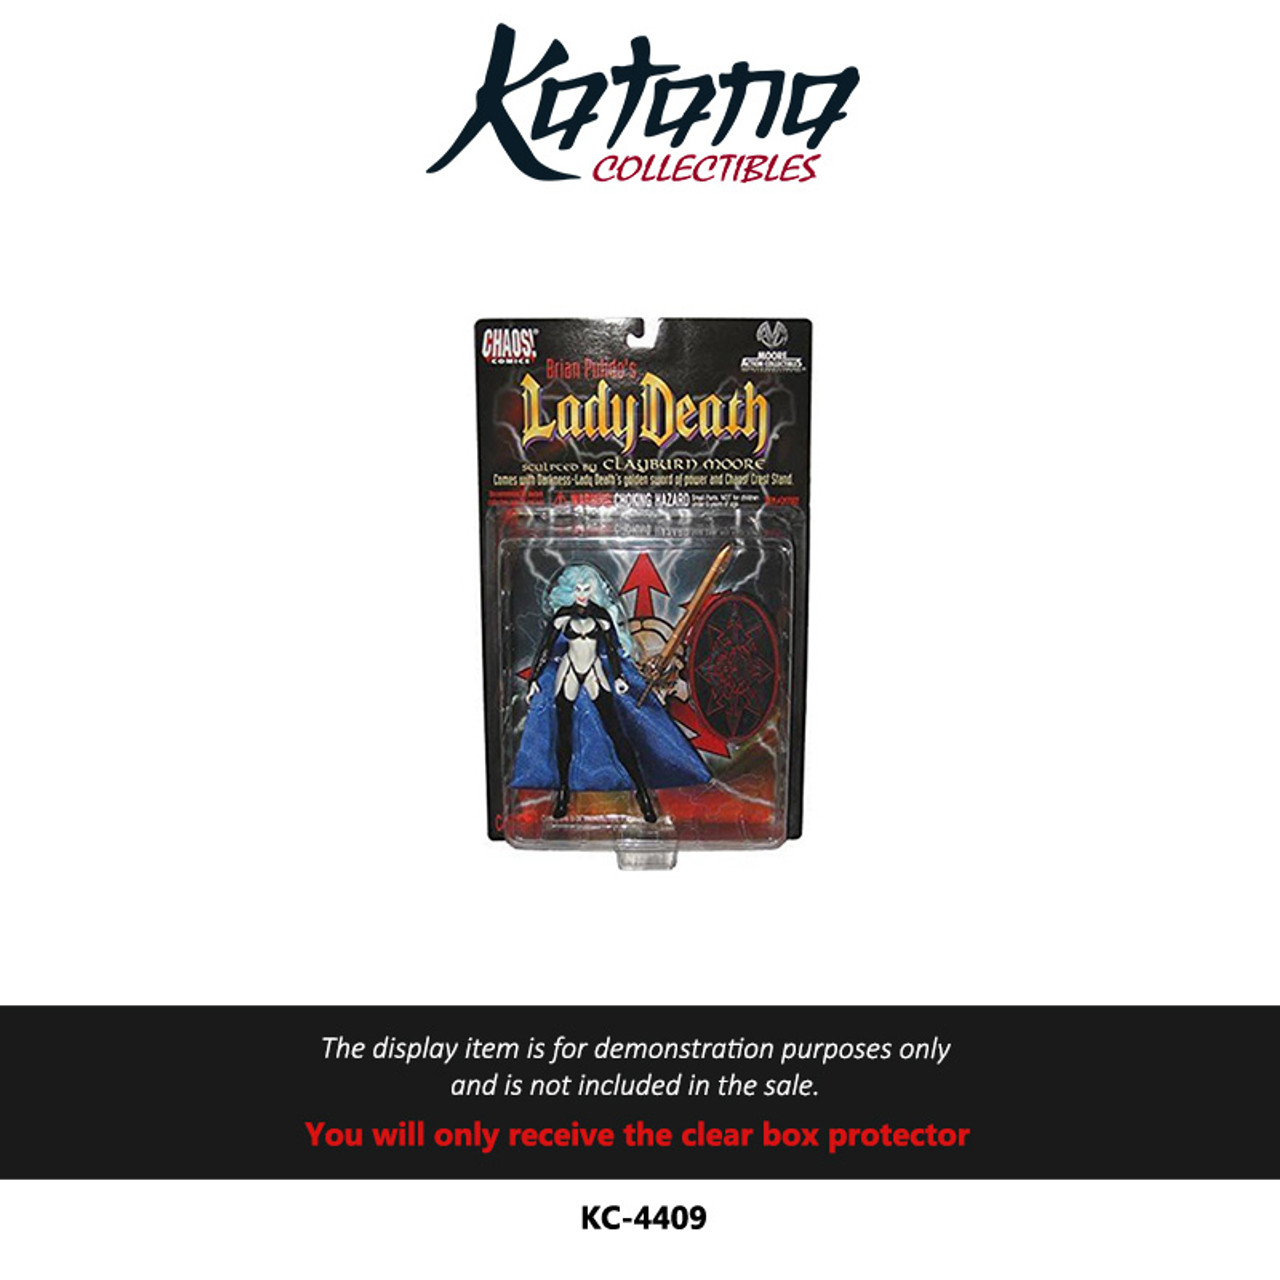 Katana Collectibles Protector For Brian Pulido's Lady Death by Chaos Comics